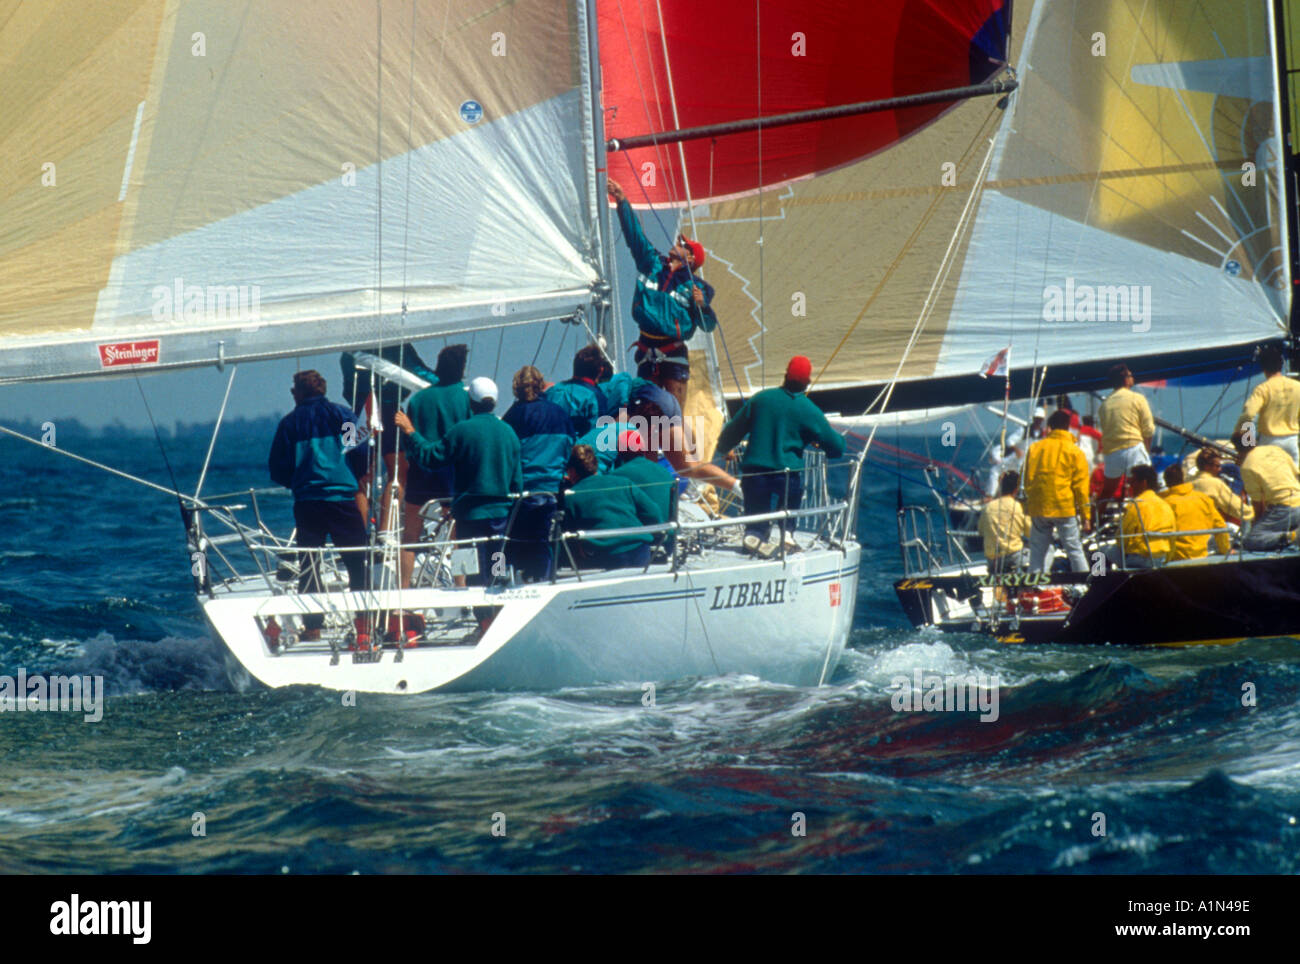 Yachting racing cowes Isola di Wight Foto Stock